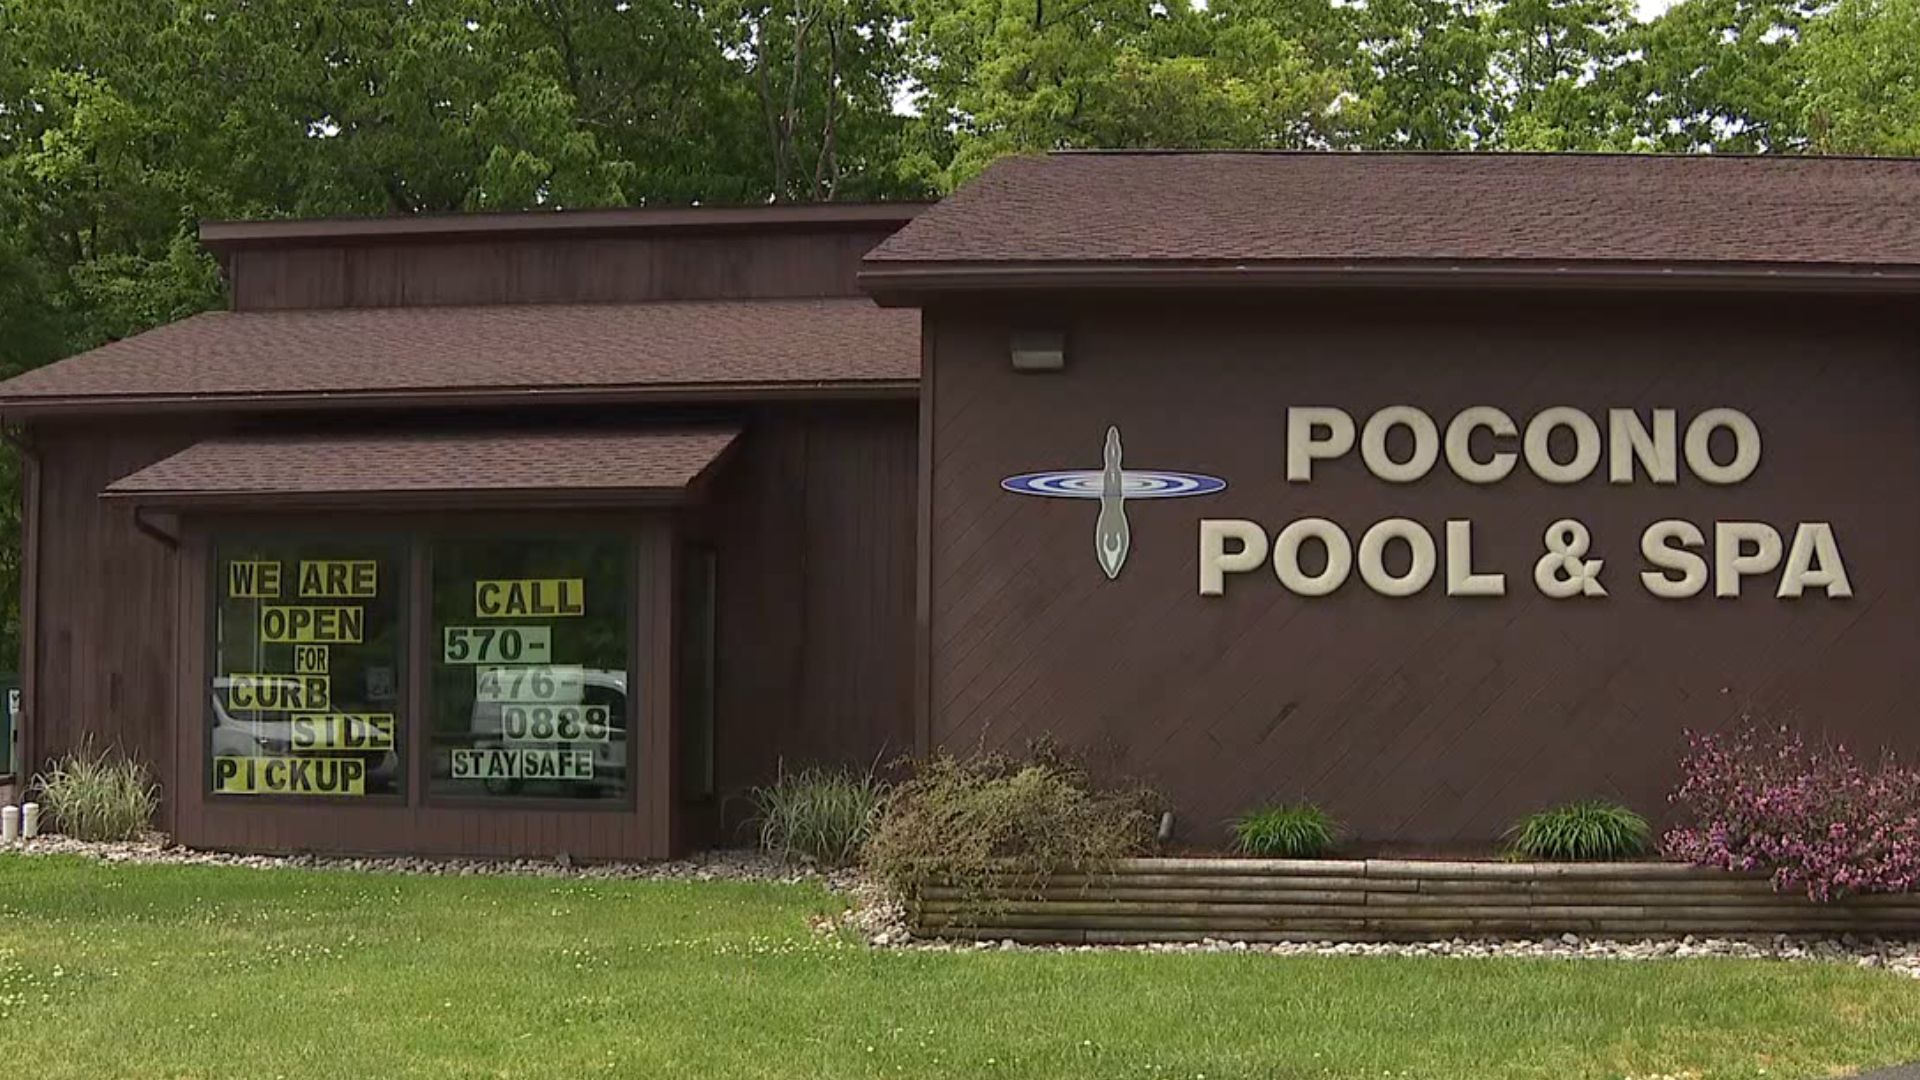 Coronavirus has forced the closure of many public pools prompting more people to buy their own to stay cool and socially distanced this summer.